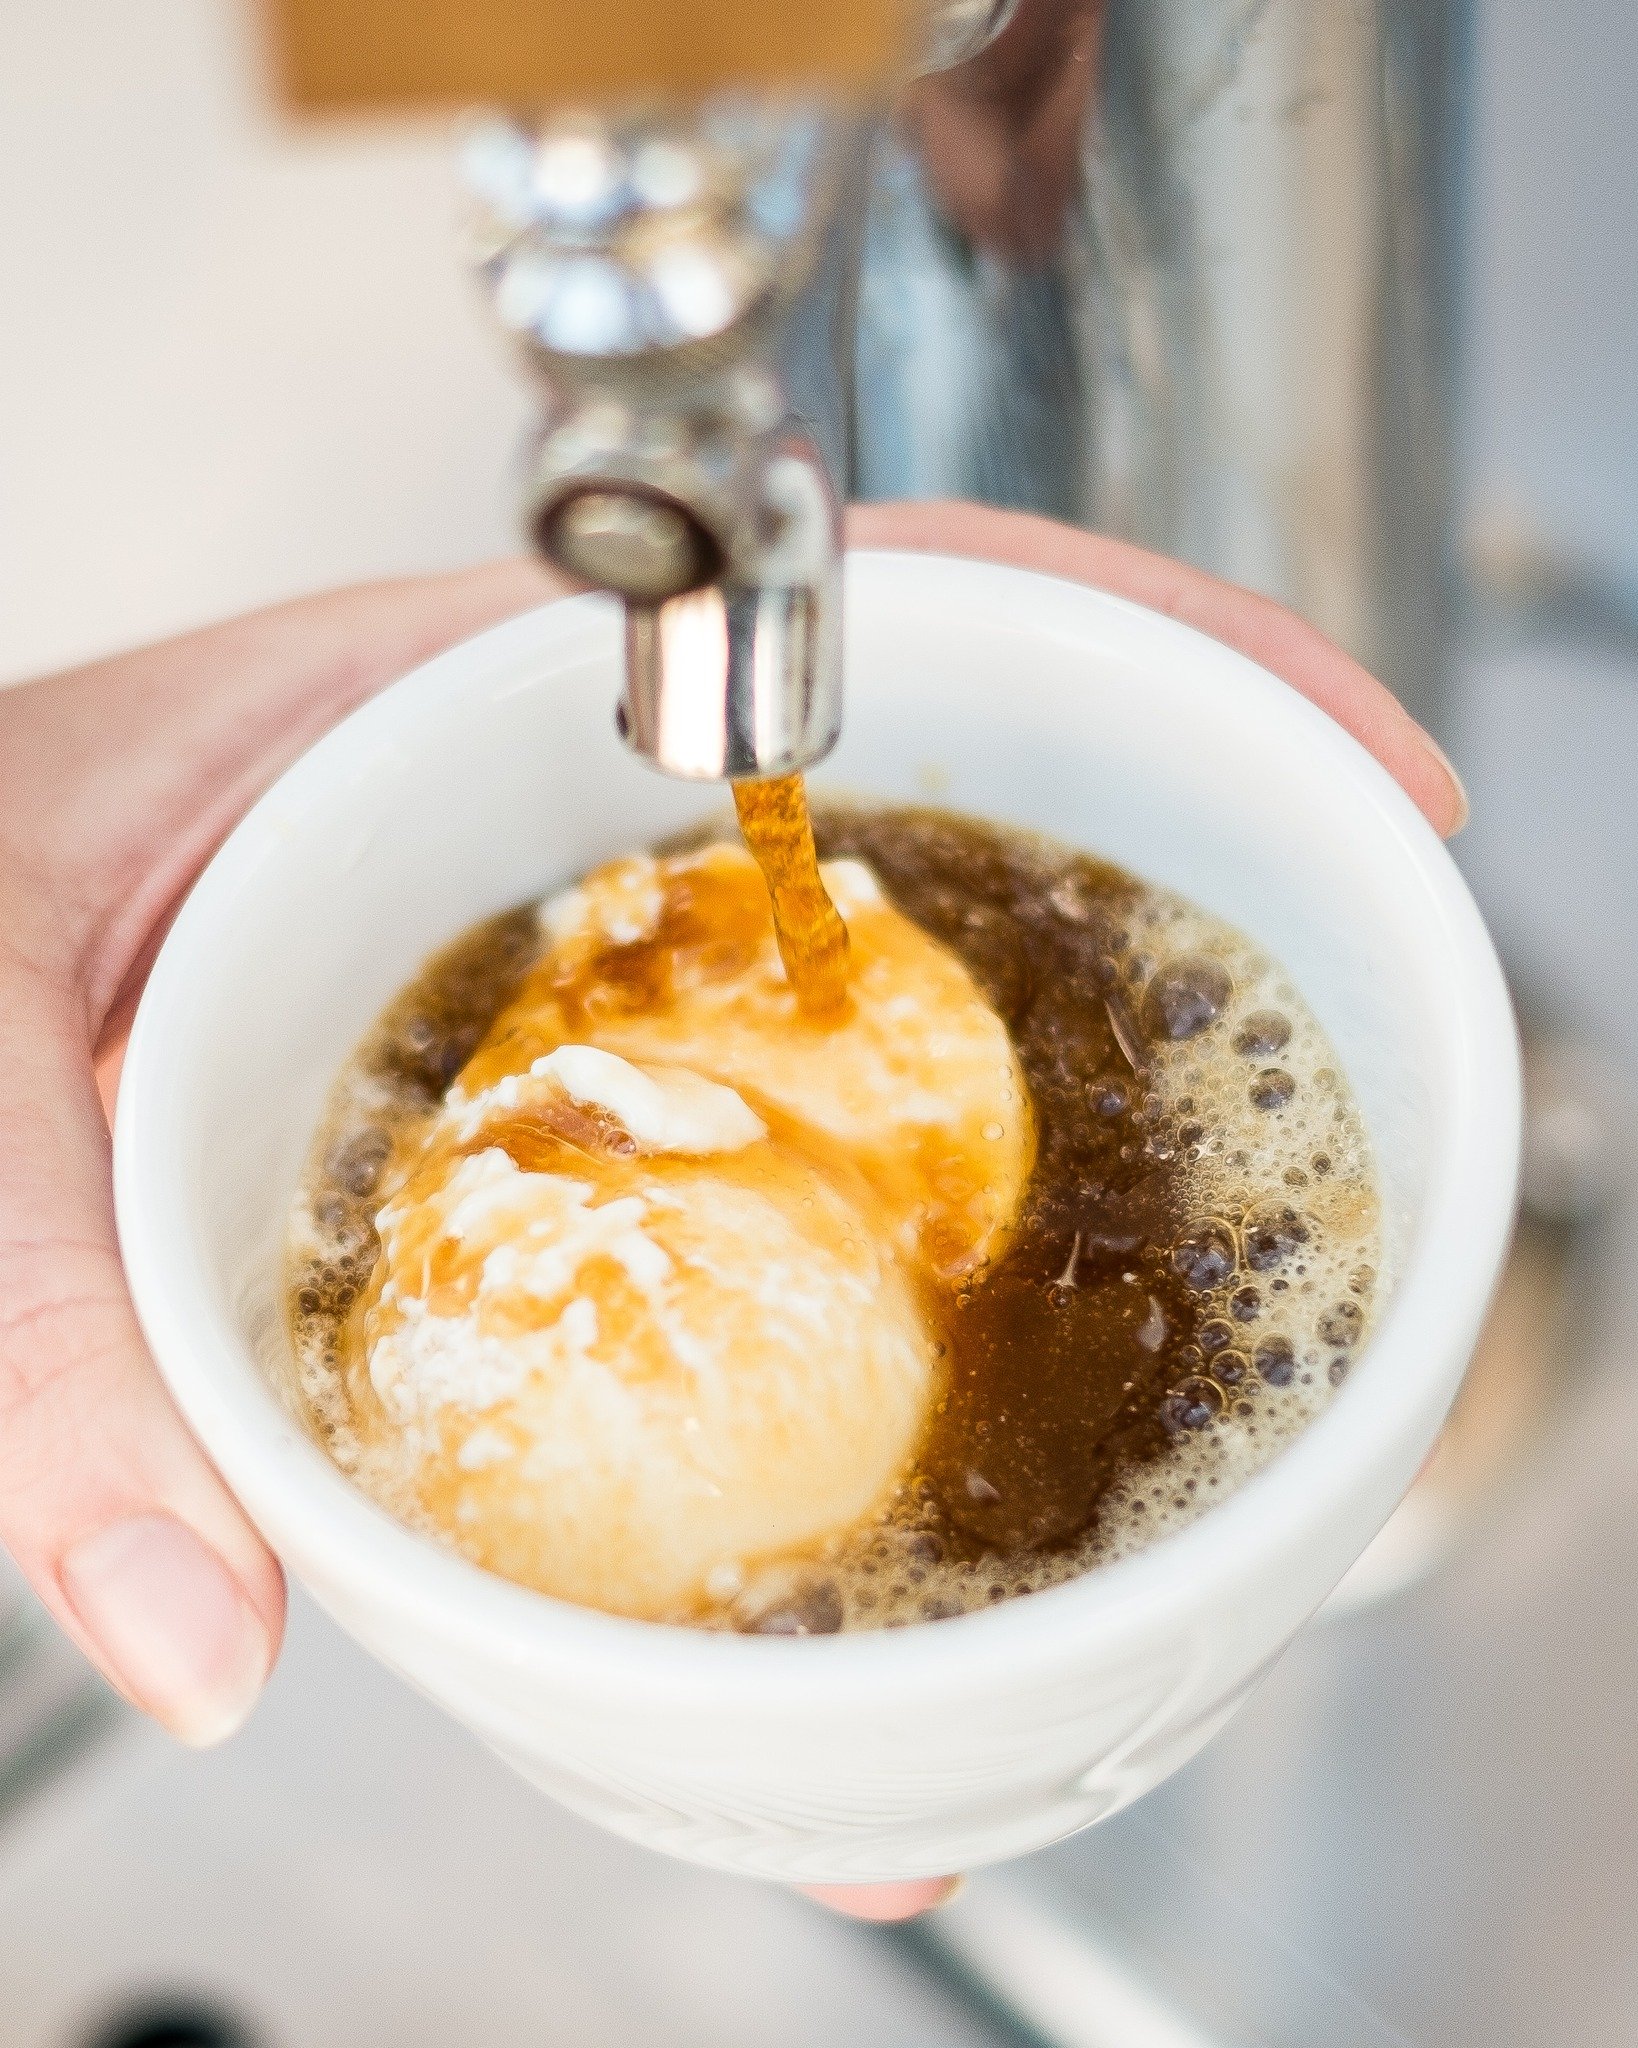 WPCR Baristas Take Over the Cafe: A Weekend of Affogato Adventures!
This weekend at White Pine Coffee Roasters, our skilled and spirited baristas are seizing the reins of the cafe while our manager takes a well-deserved break. With creativity and ent